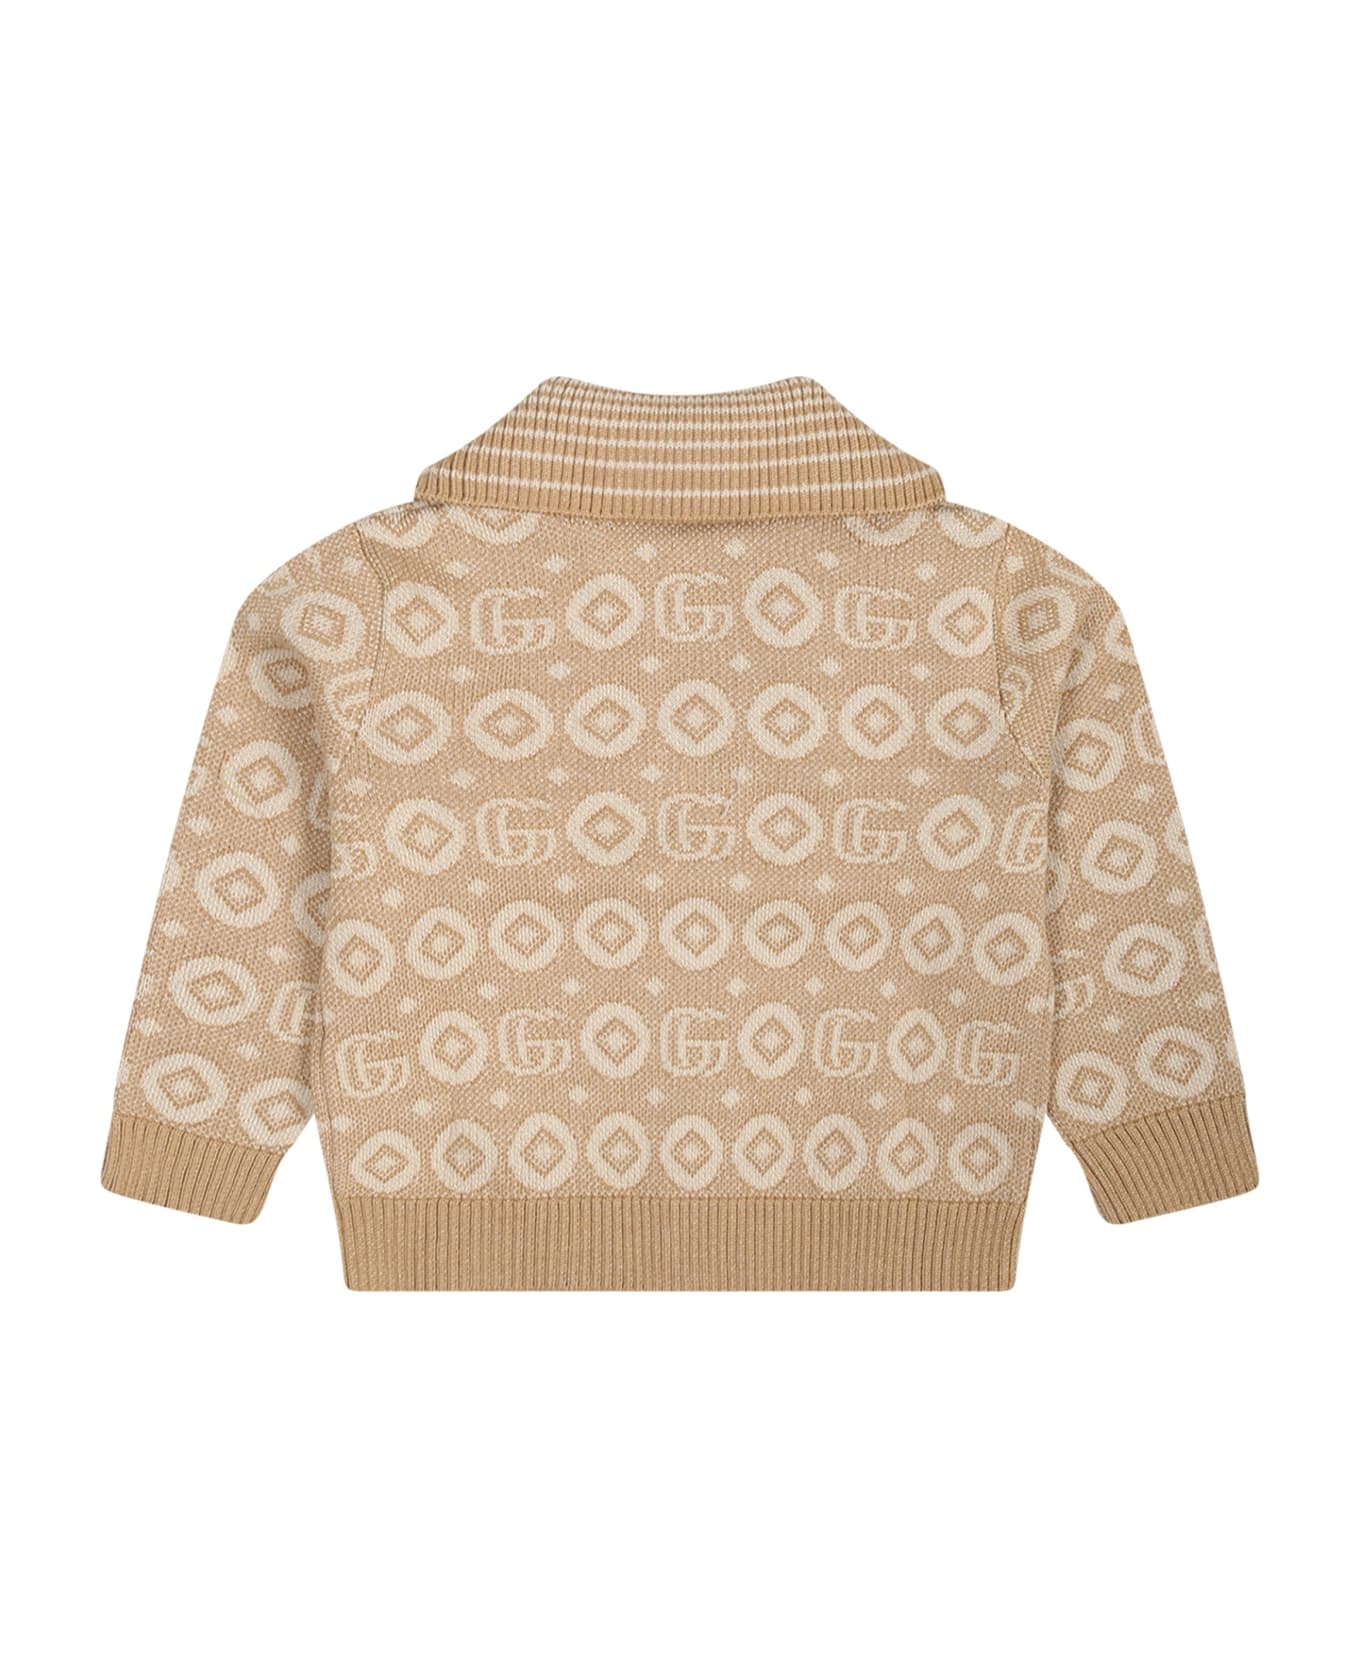 Gucci Beige Cardigan For Boy With Double G - Beige ニットウェア＆スウェットシャツ